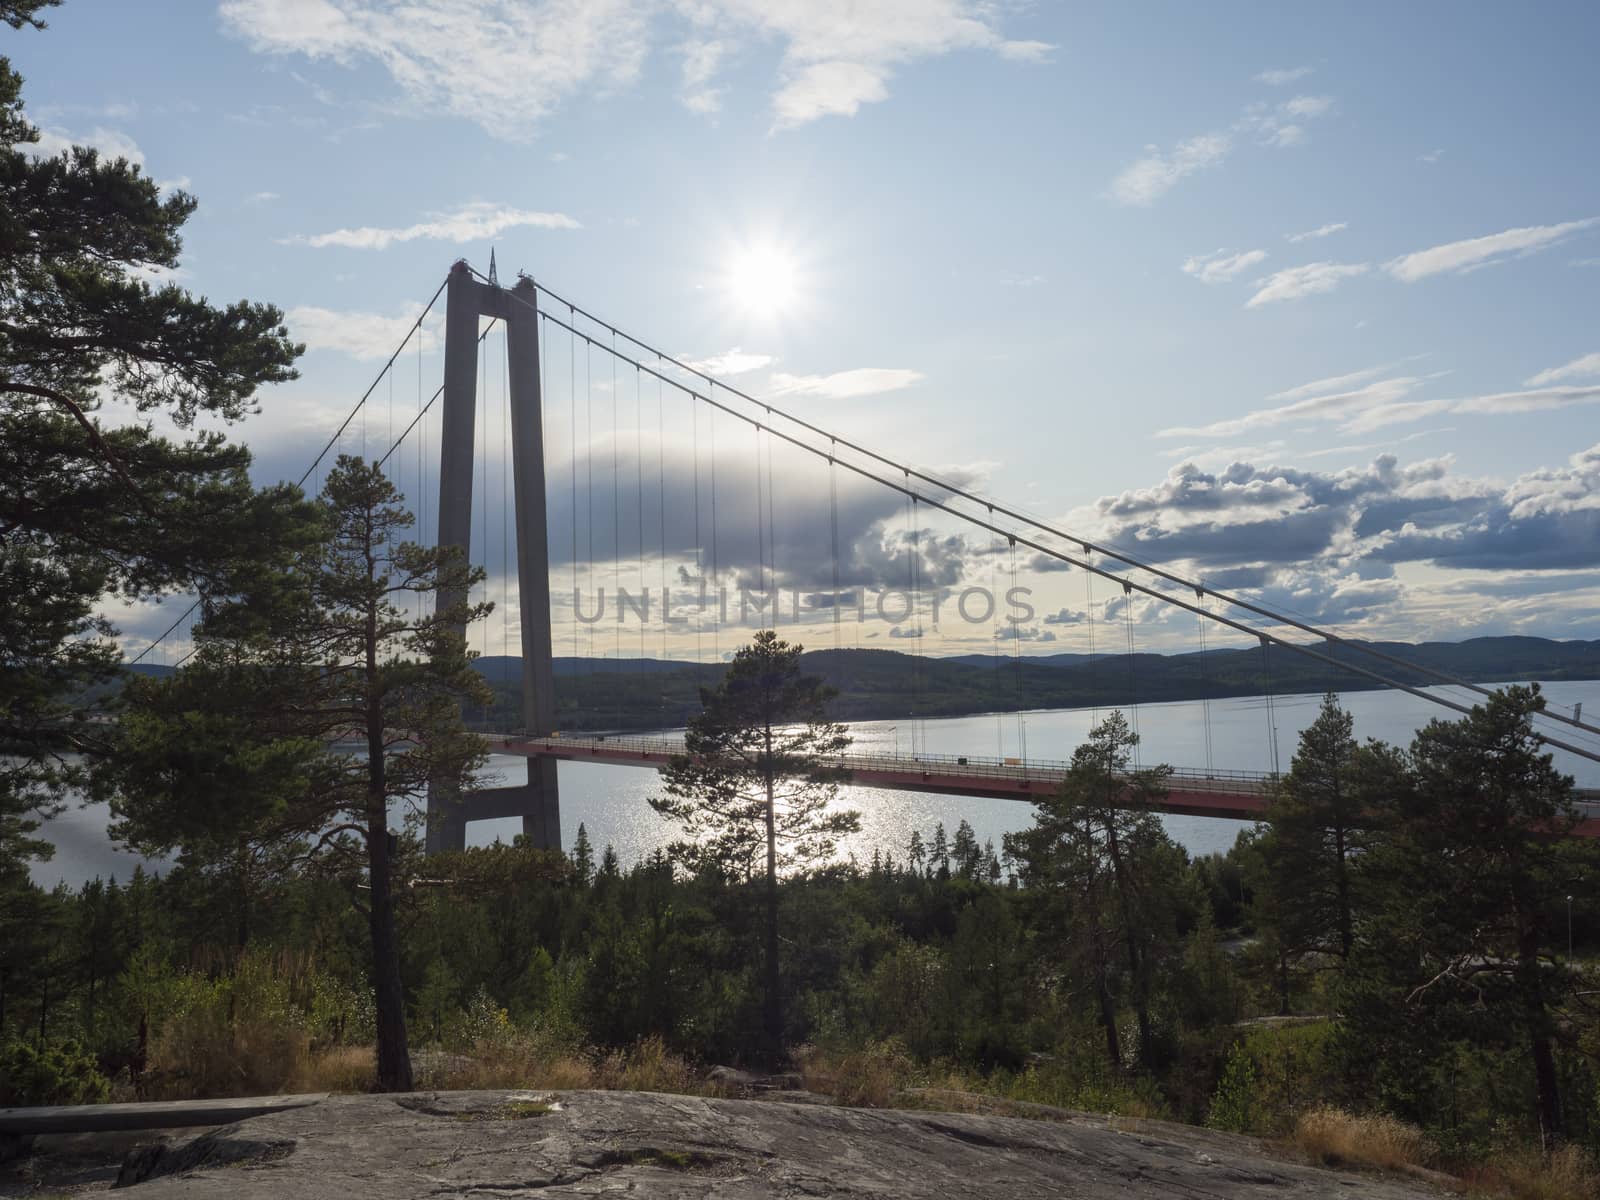 Summer view of the High coast bridge Hogakustenbron seen from the north bank of the river Angermanalven located near Harnosand in Vaesternorrland, Sweden. by Henkeova